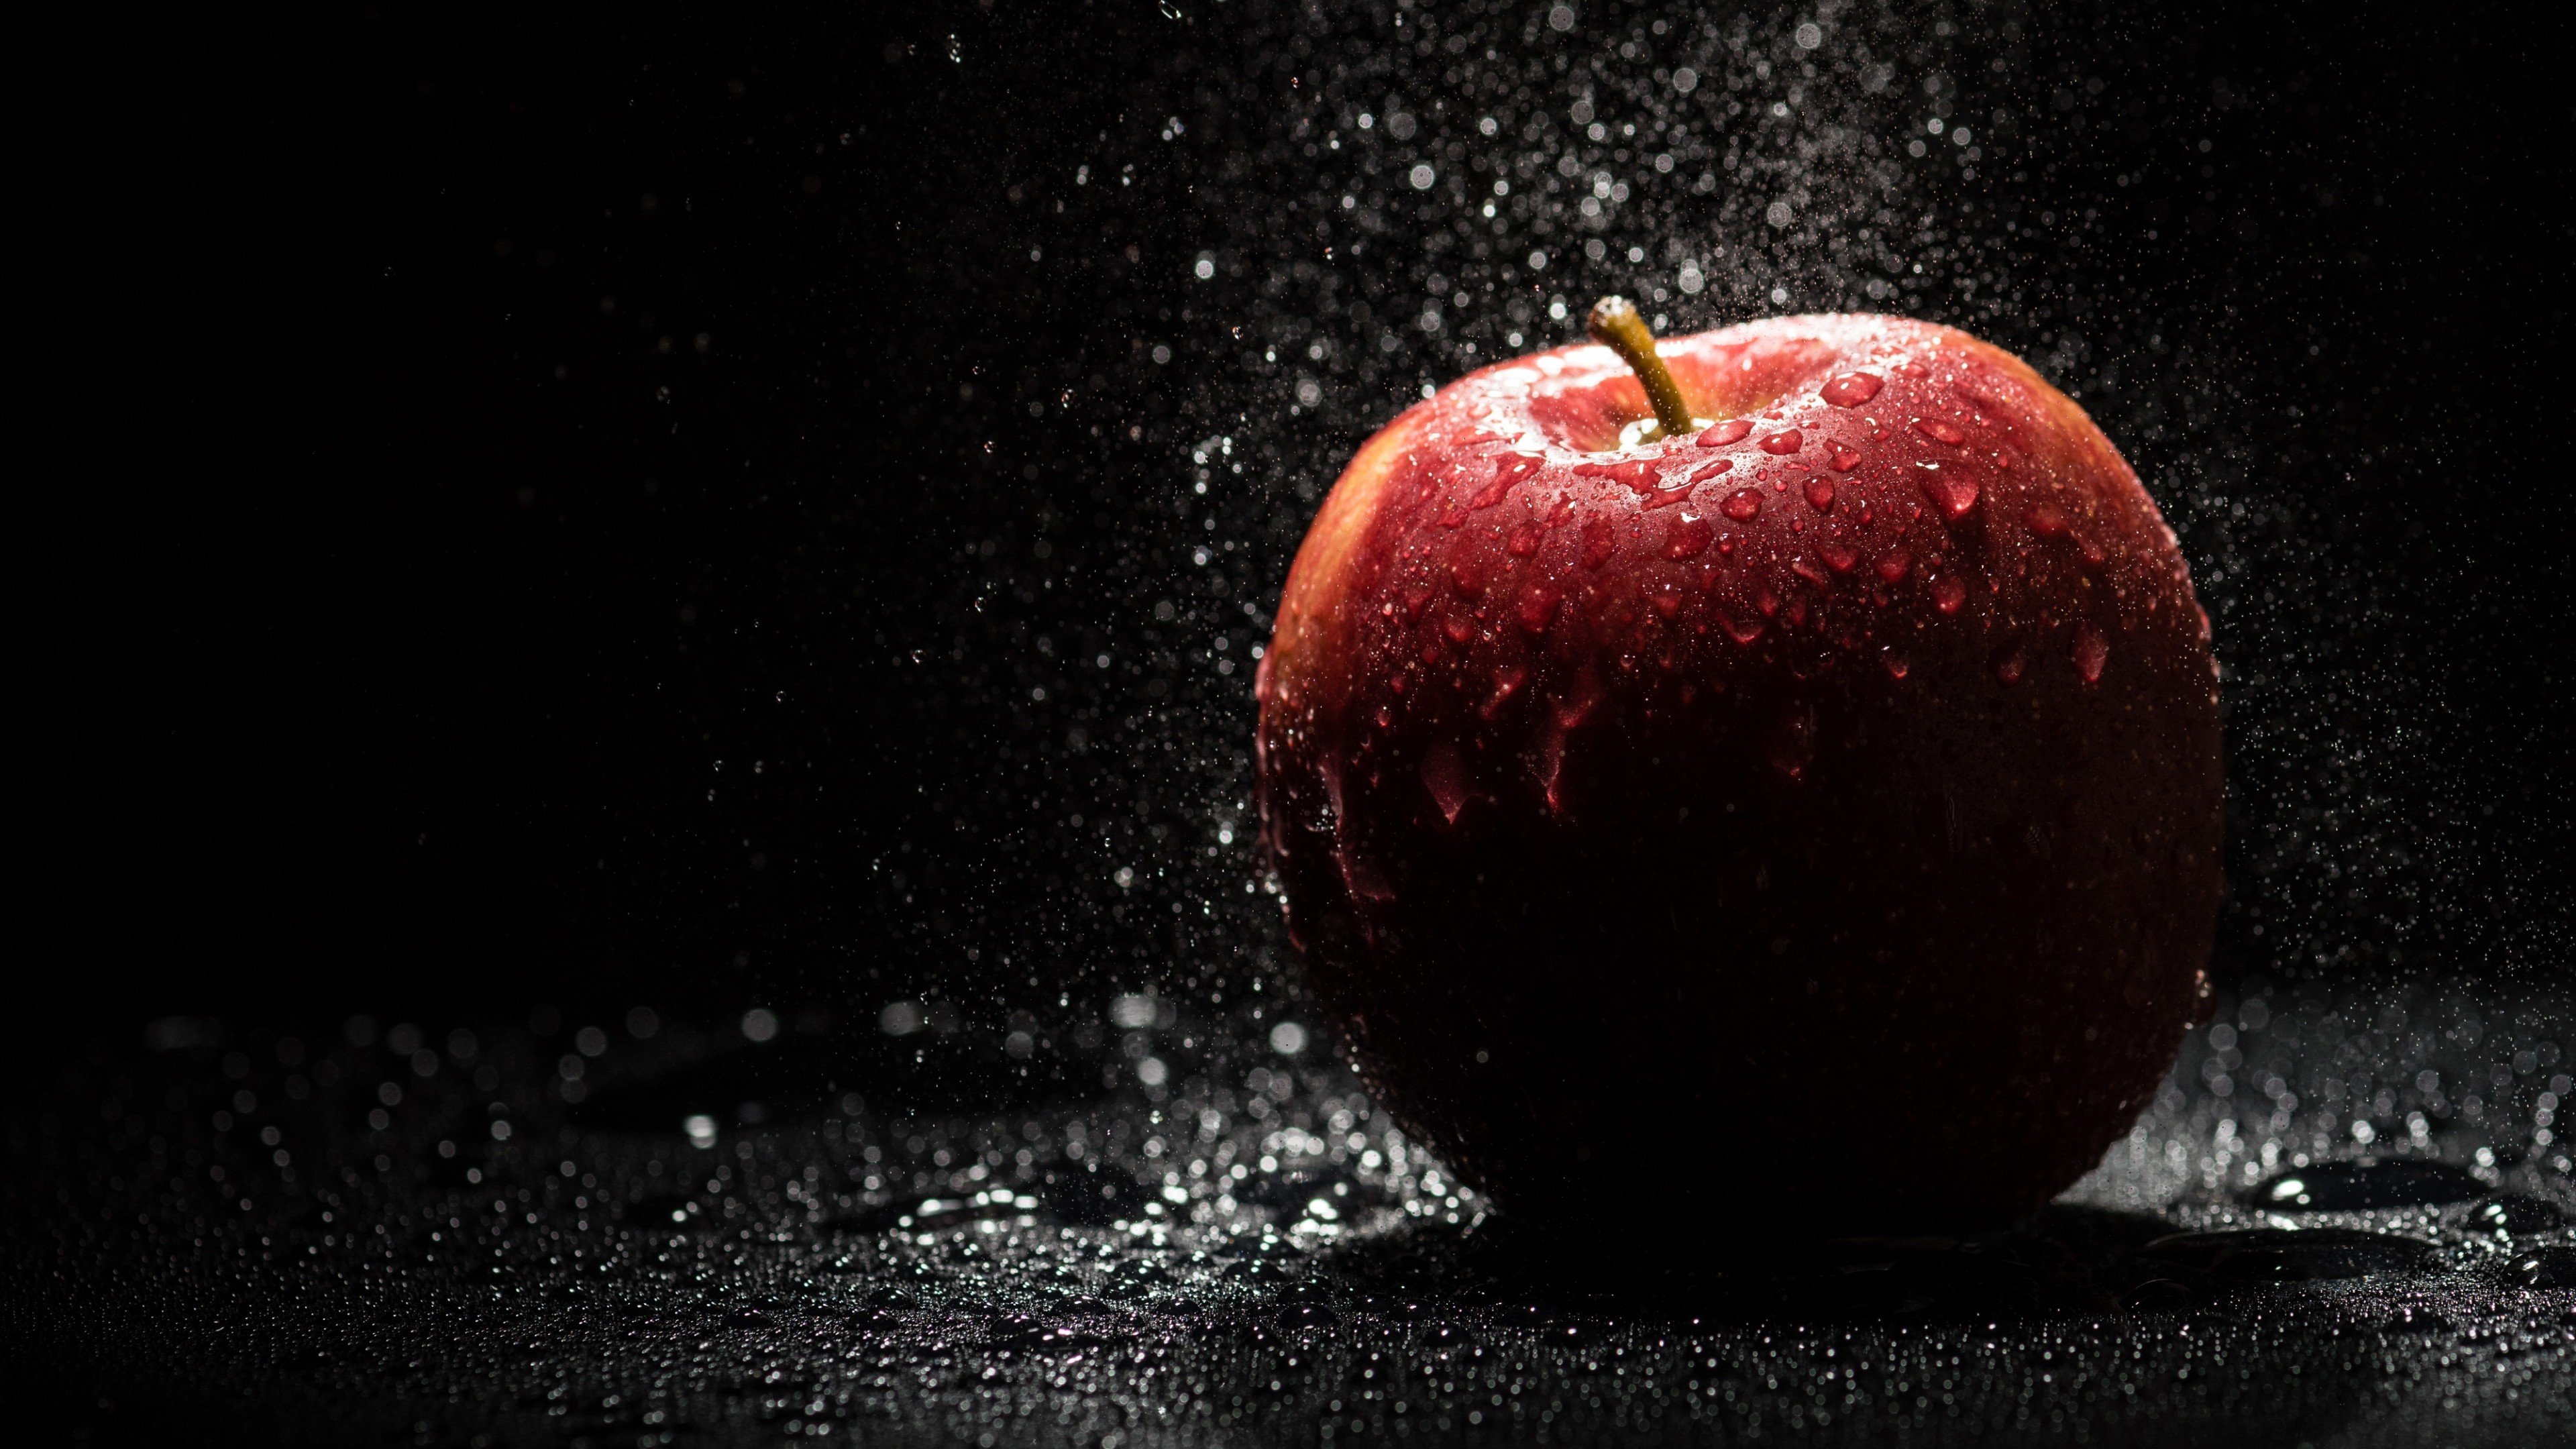 water, Water drops, Fruit, Apples, Shadow, Lights, Black background, Photography, Splashes Wallpaper